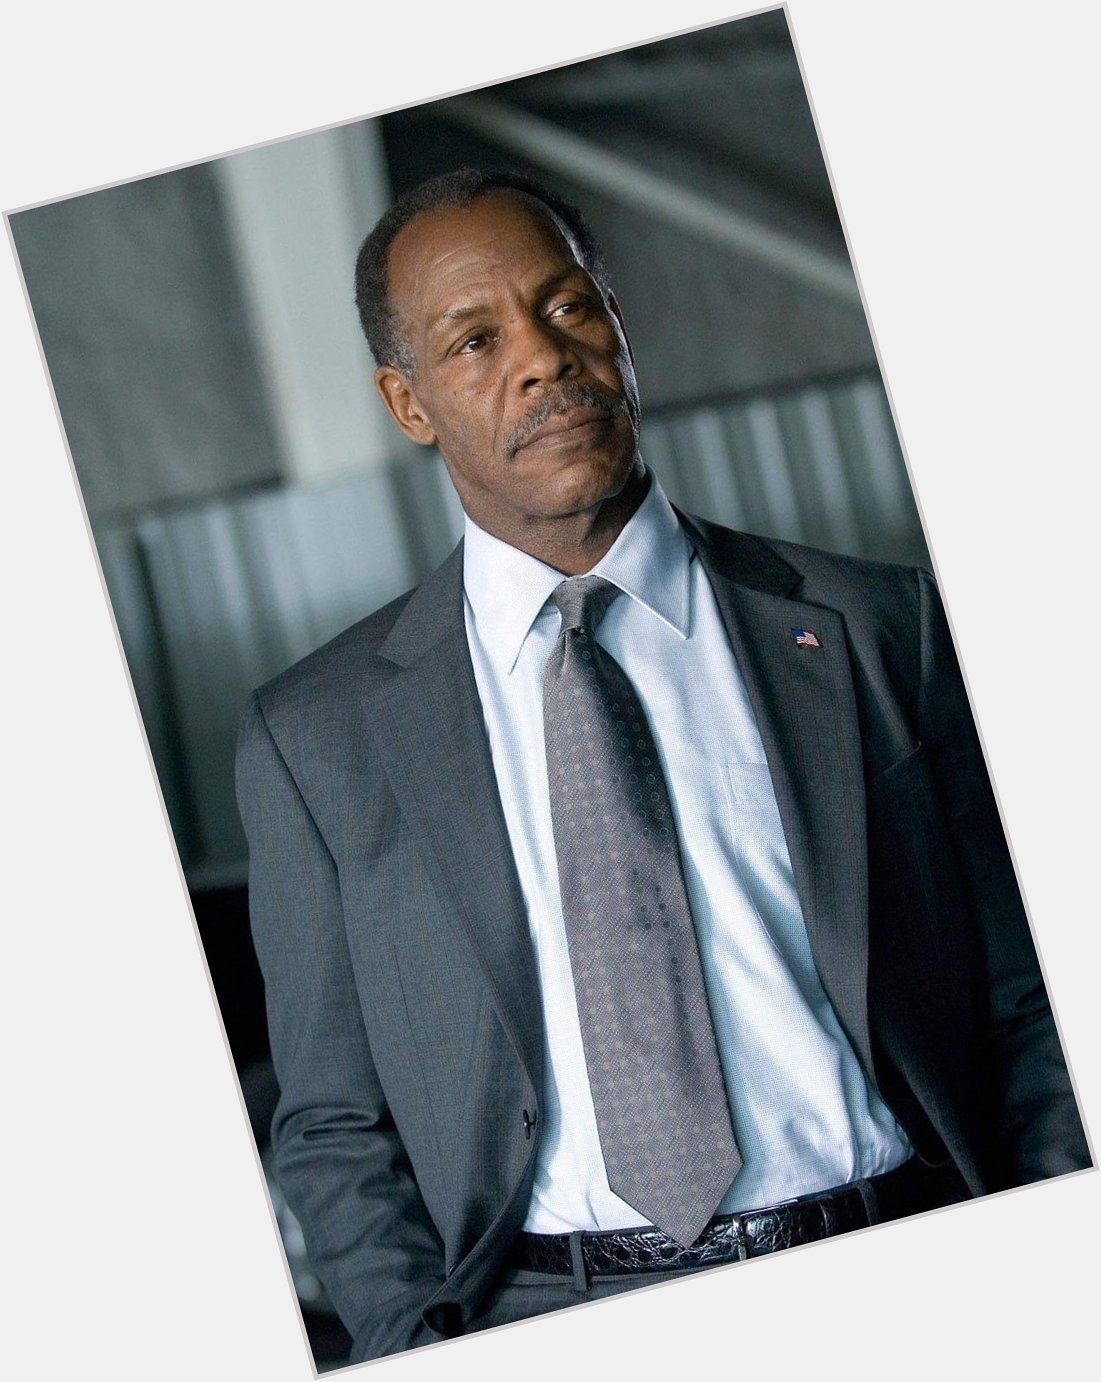 Happy Birthday to Danny Glover who turns 73 today! 